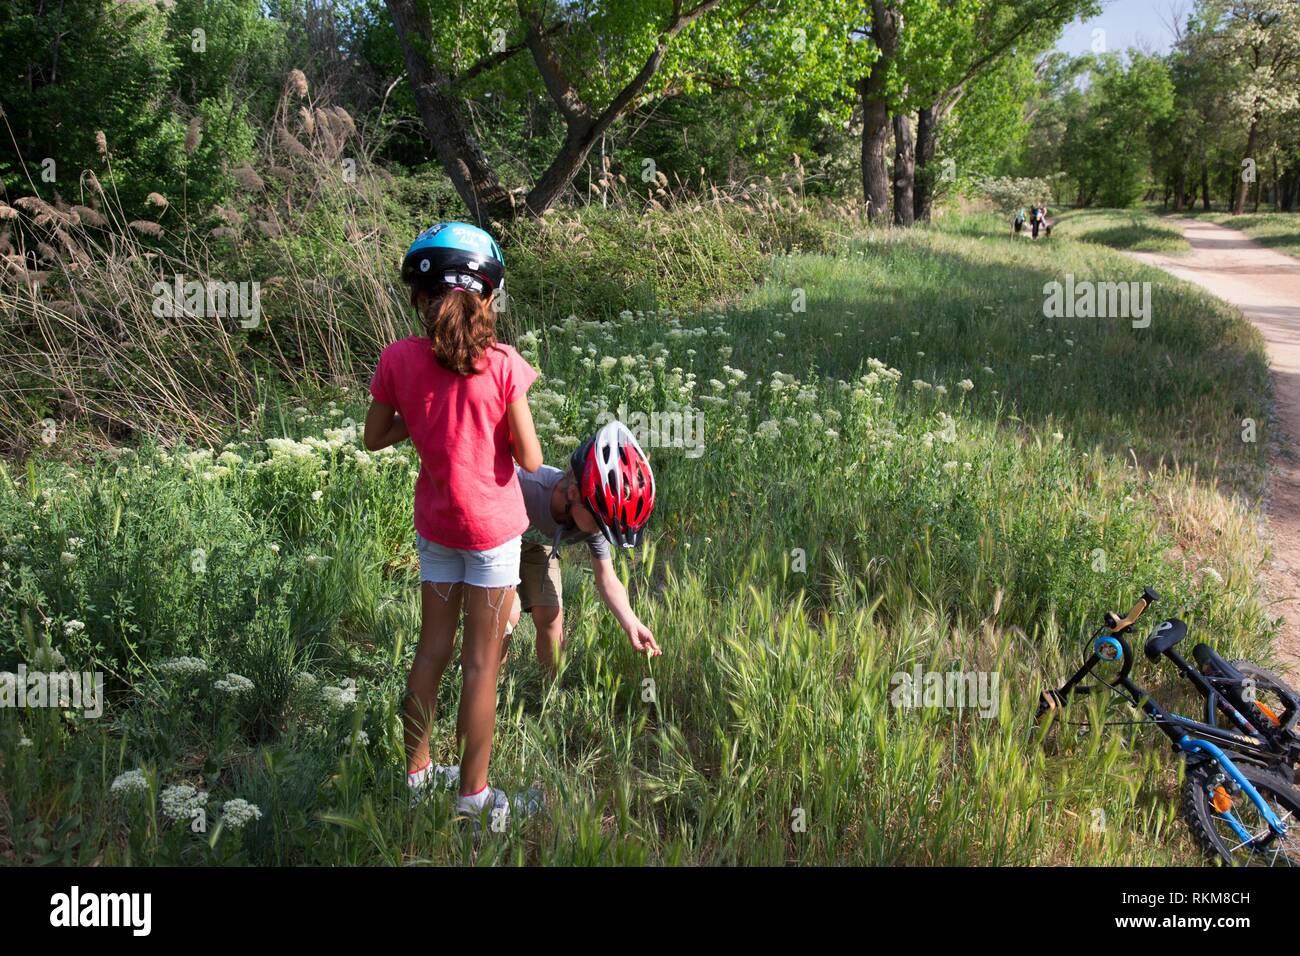 Children catching insects. Rio Henares. Madrid Province. Spain. Stock Photo